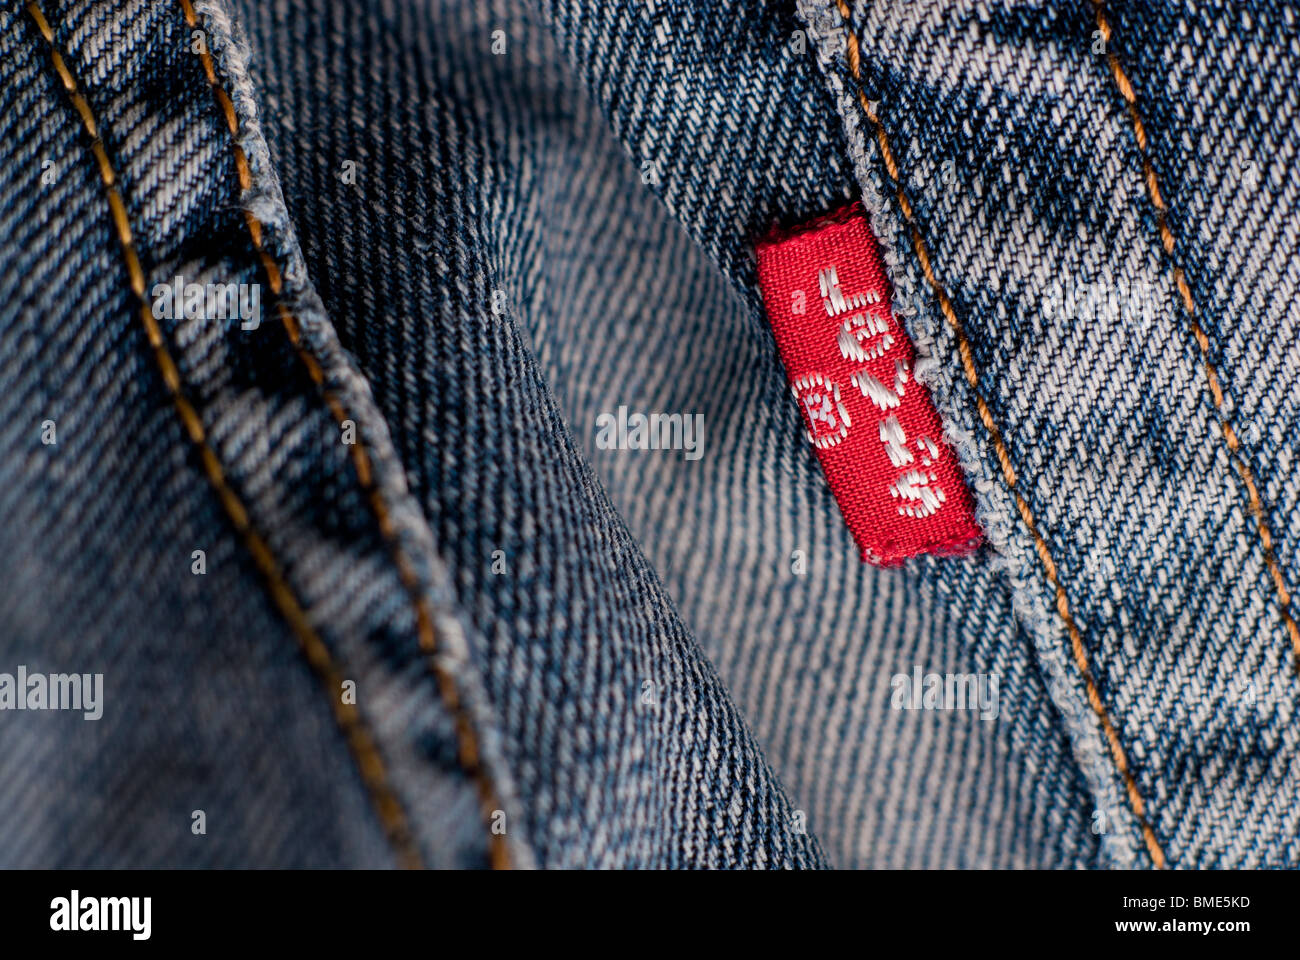 Levi's 501 Jeans Red Label and Pocket Stock Photo - Alamy